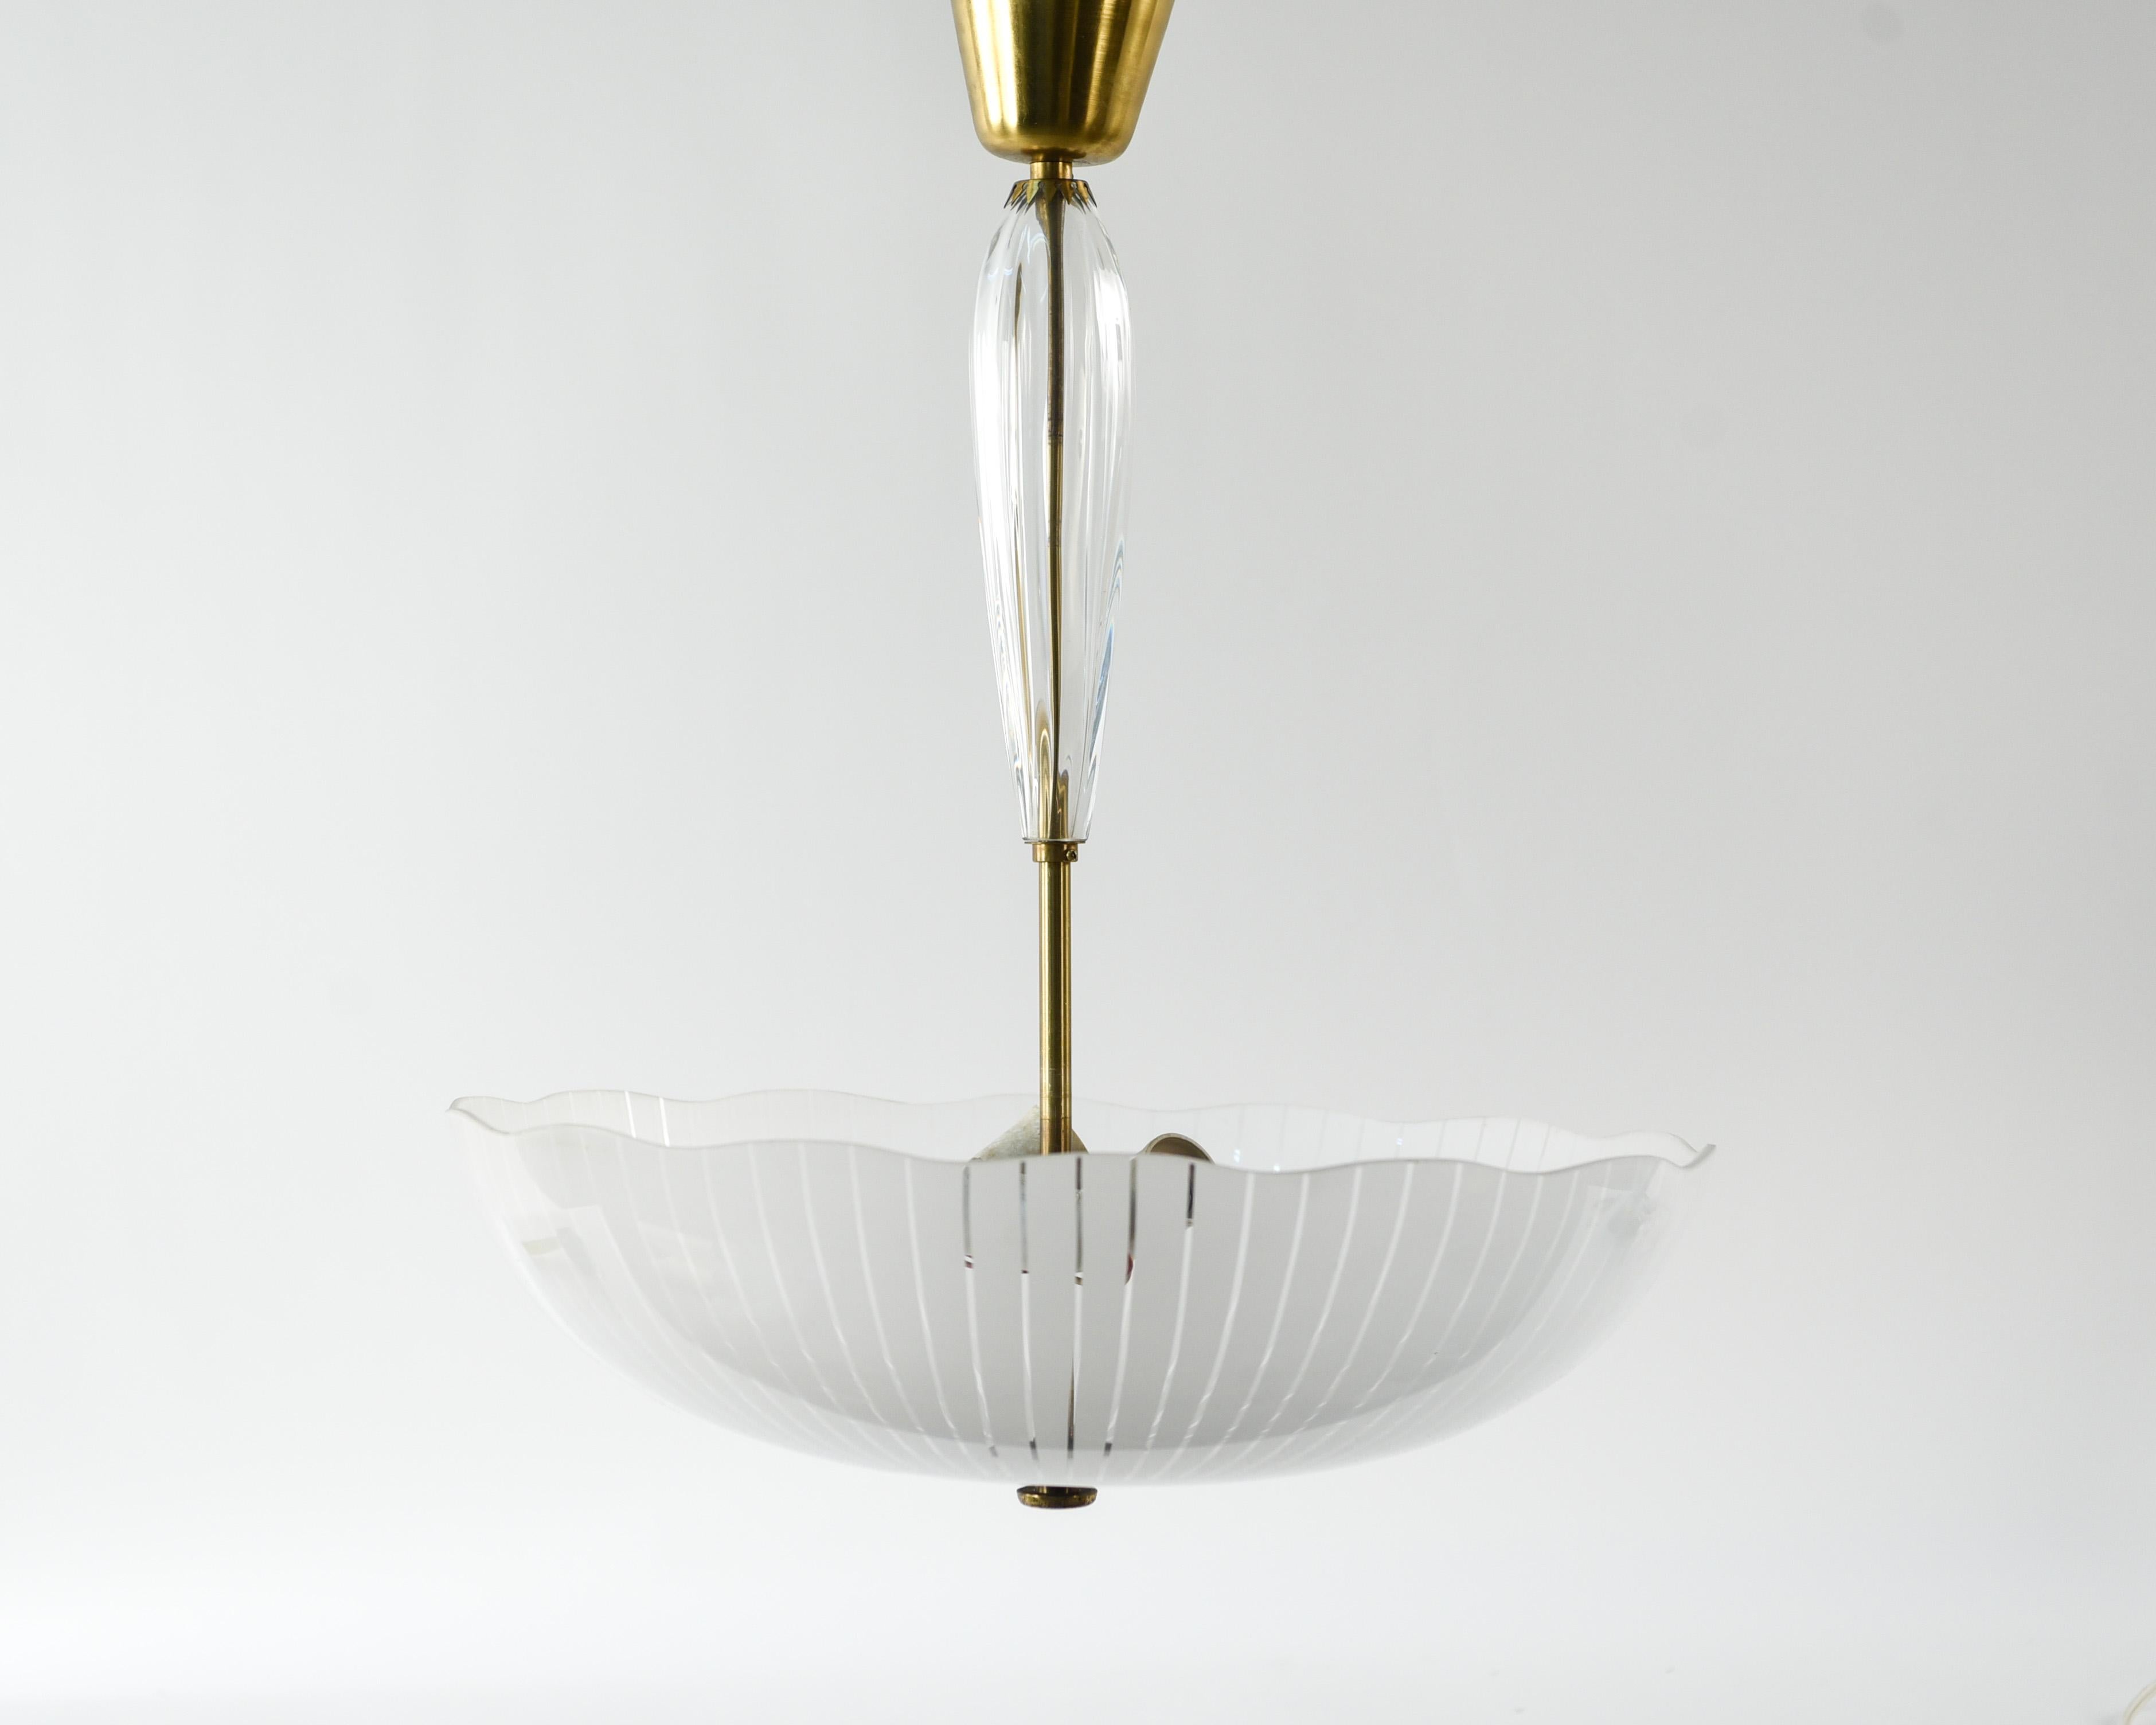 This is a stunning stylized etched glass chandelier with brass hardware by Carl Fagerlund for Orrefors, circa 1940s. This rare piece has a timeless elegance to it.